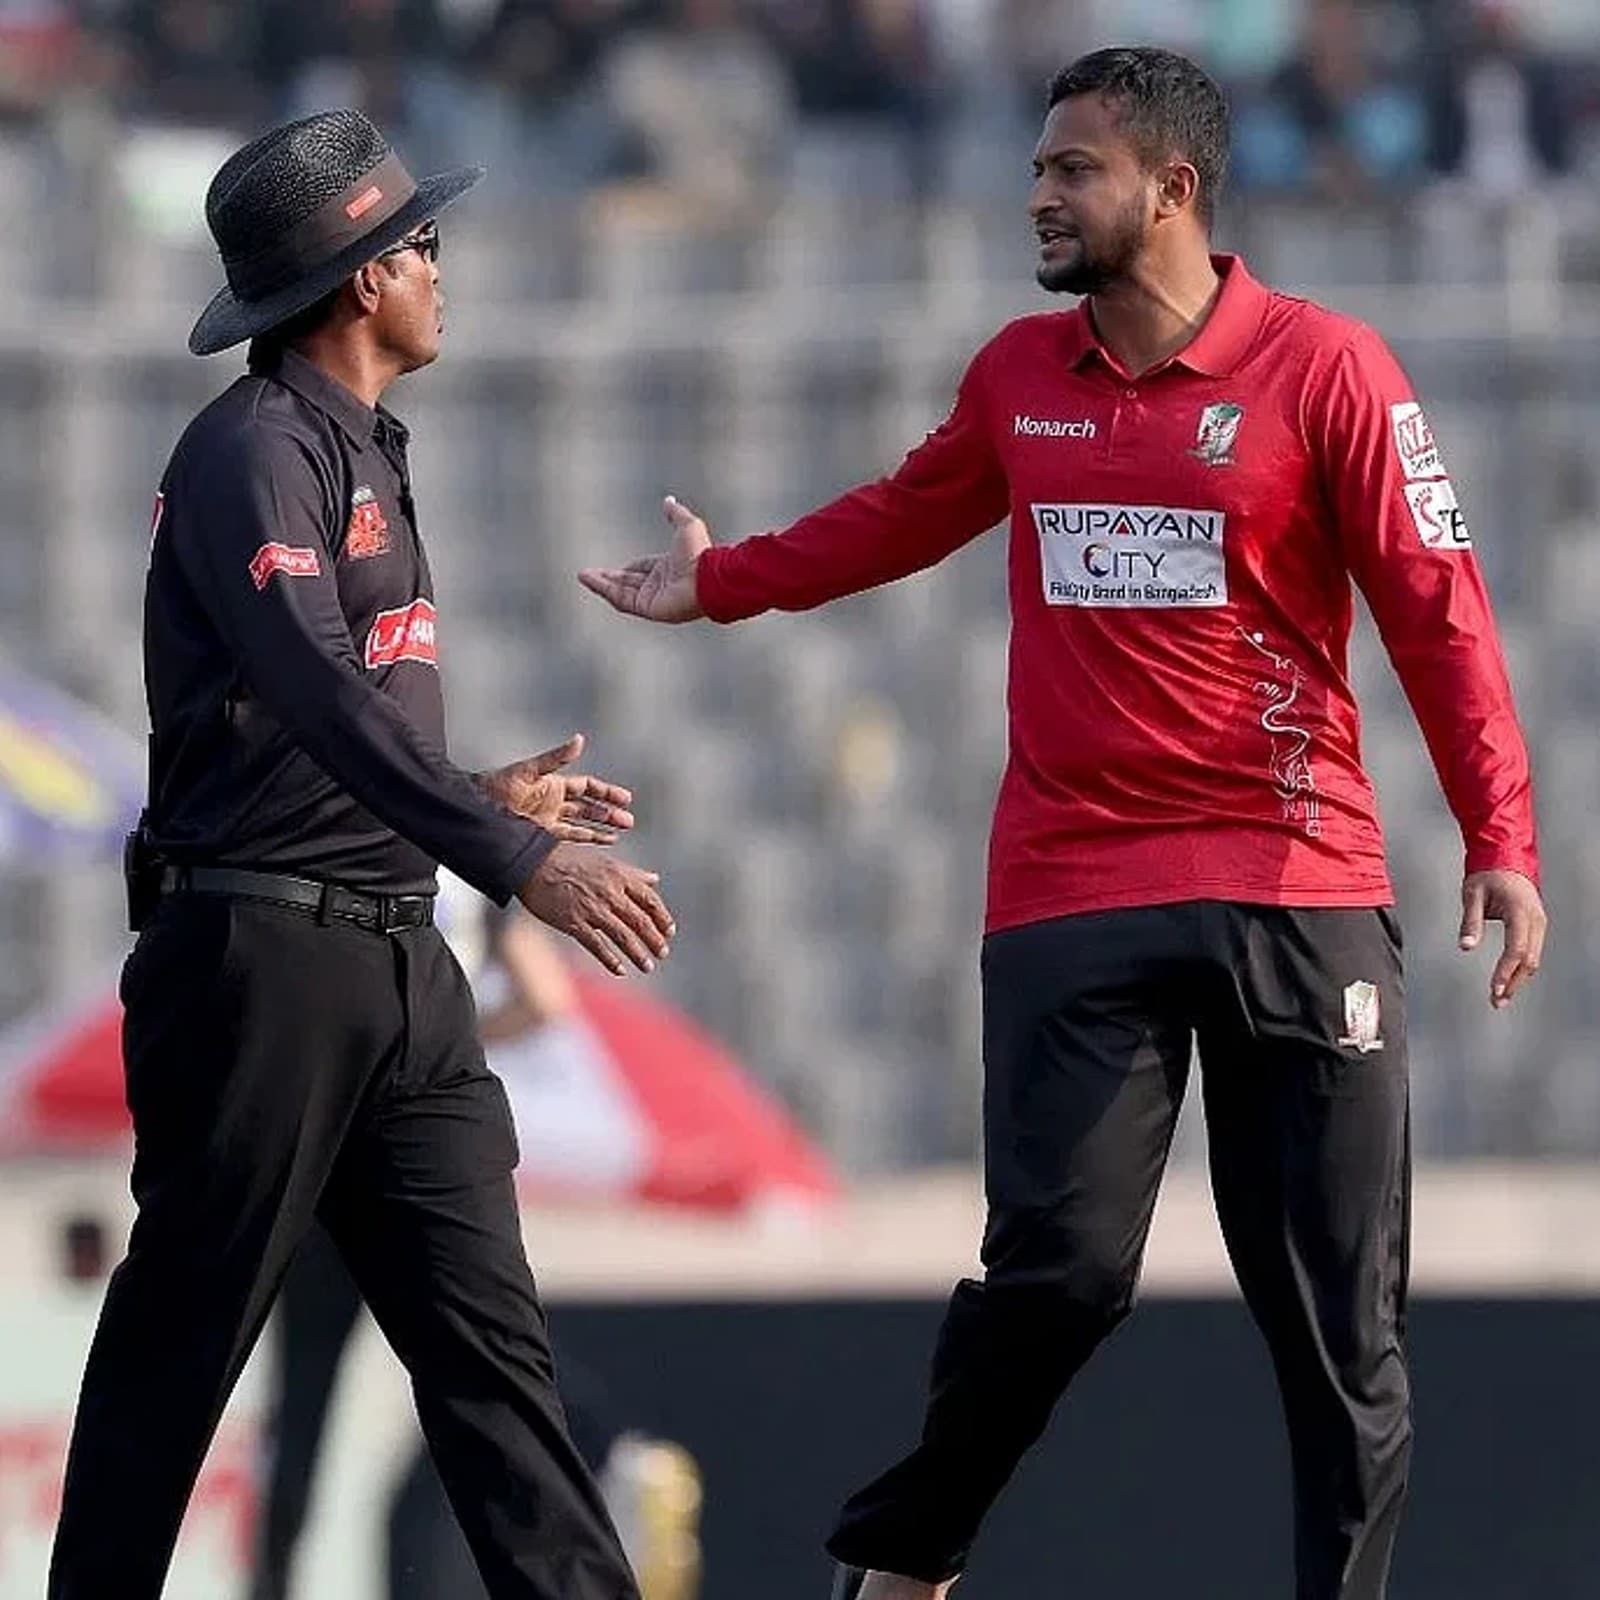 Shakib Al Hasan Loses His Calm in BPL, Walks Out on Field and Shouts at Umpire Watch